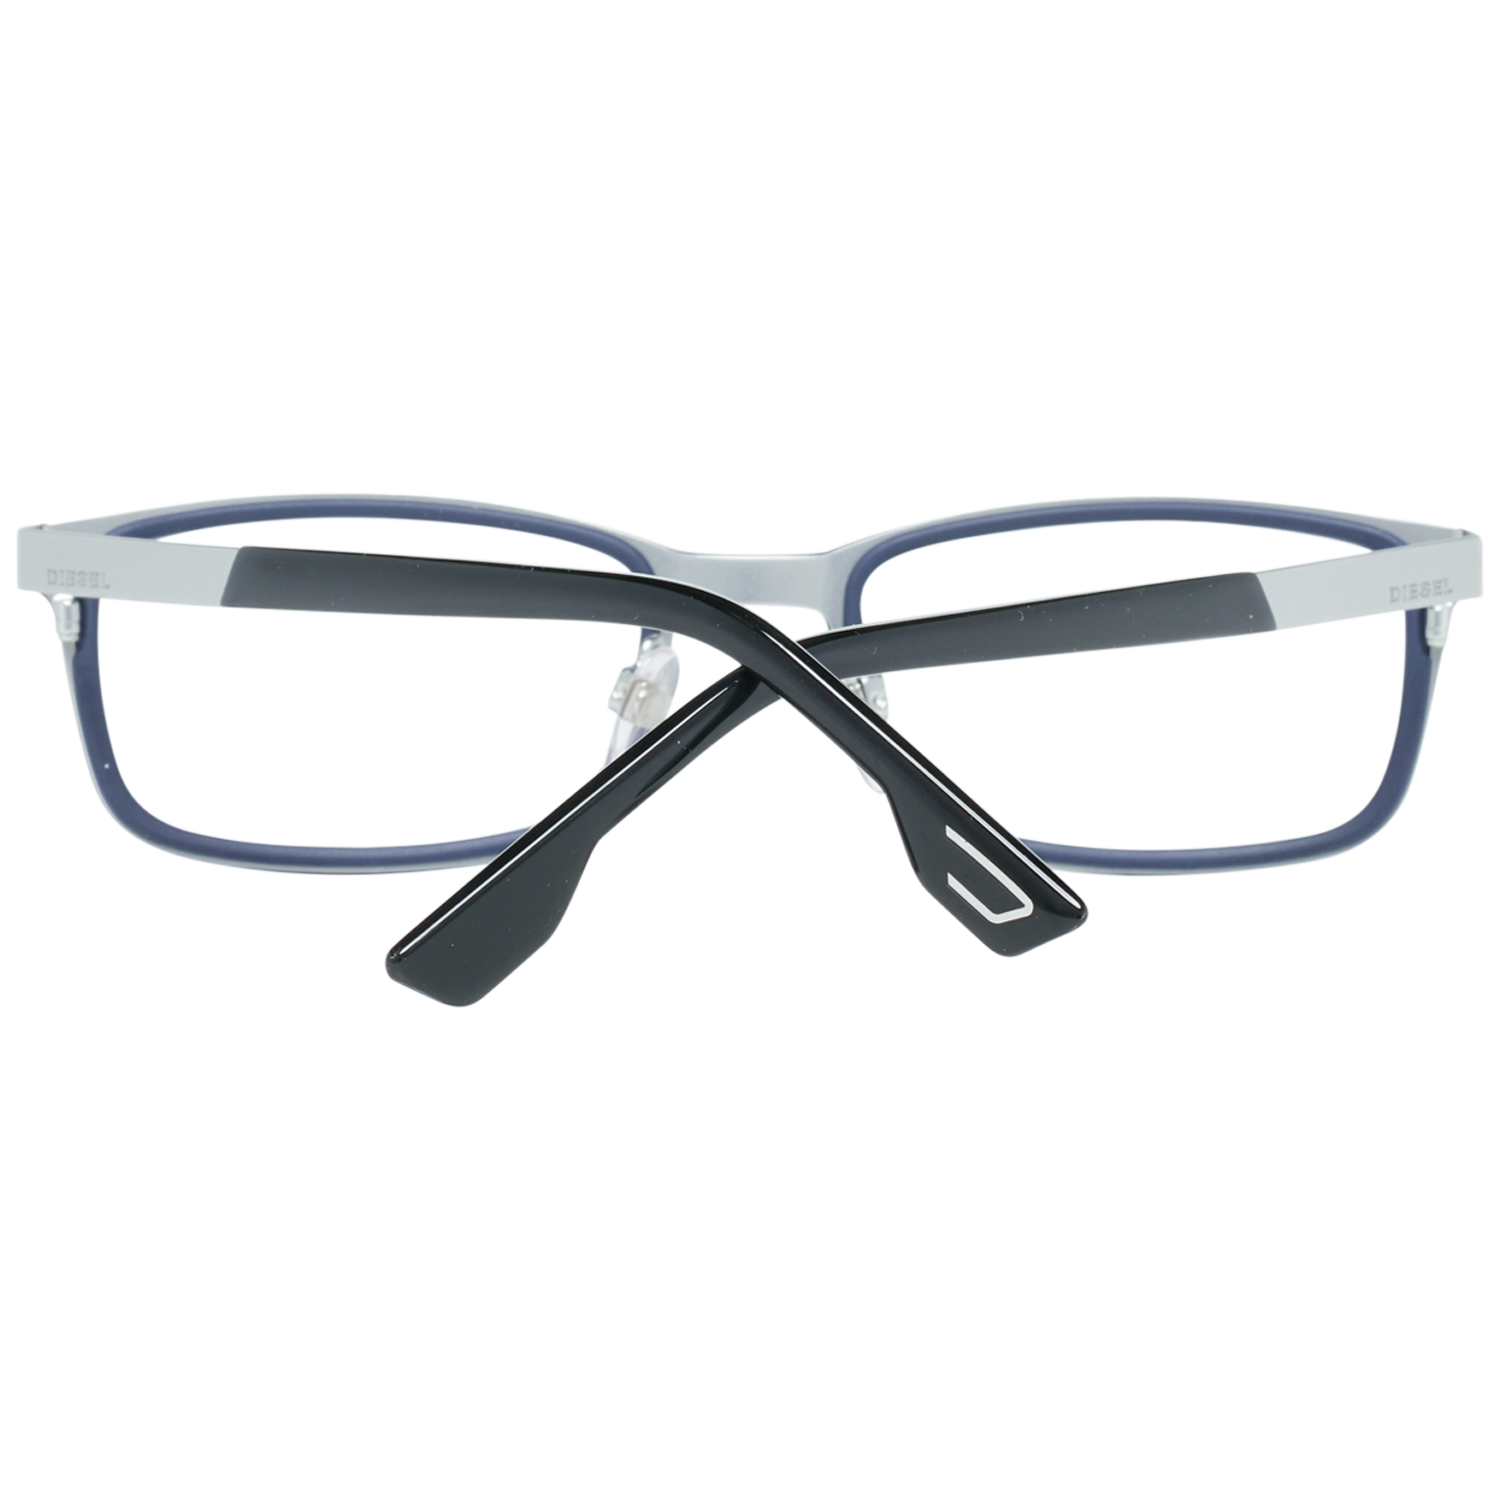 GenderMenMain colorBlueFrame colorBlueFrame materialPlasticSize54-20-145Lenses width54mmLenses heigth31mmBridge length20mmFrame width140mmTemple length145mmShipment includesCase, Cleaning clothStyleFull-RimSpring hingeNo